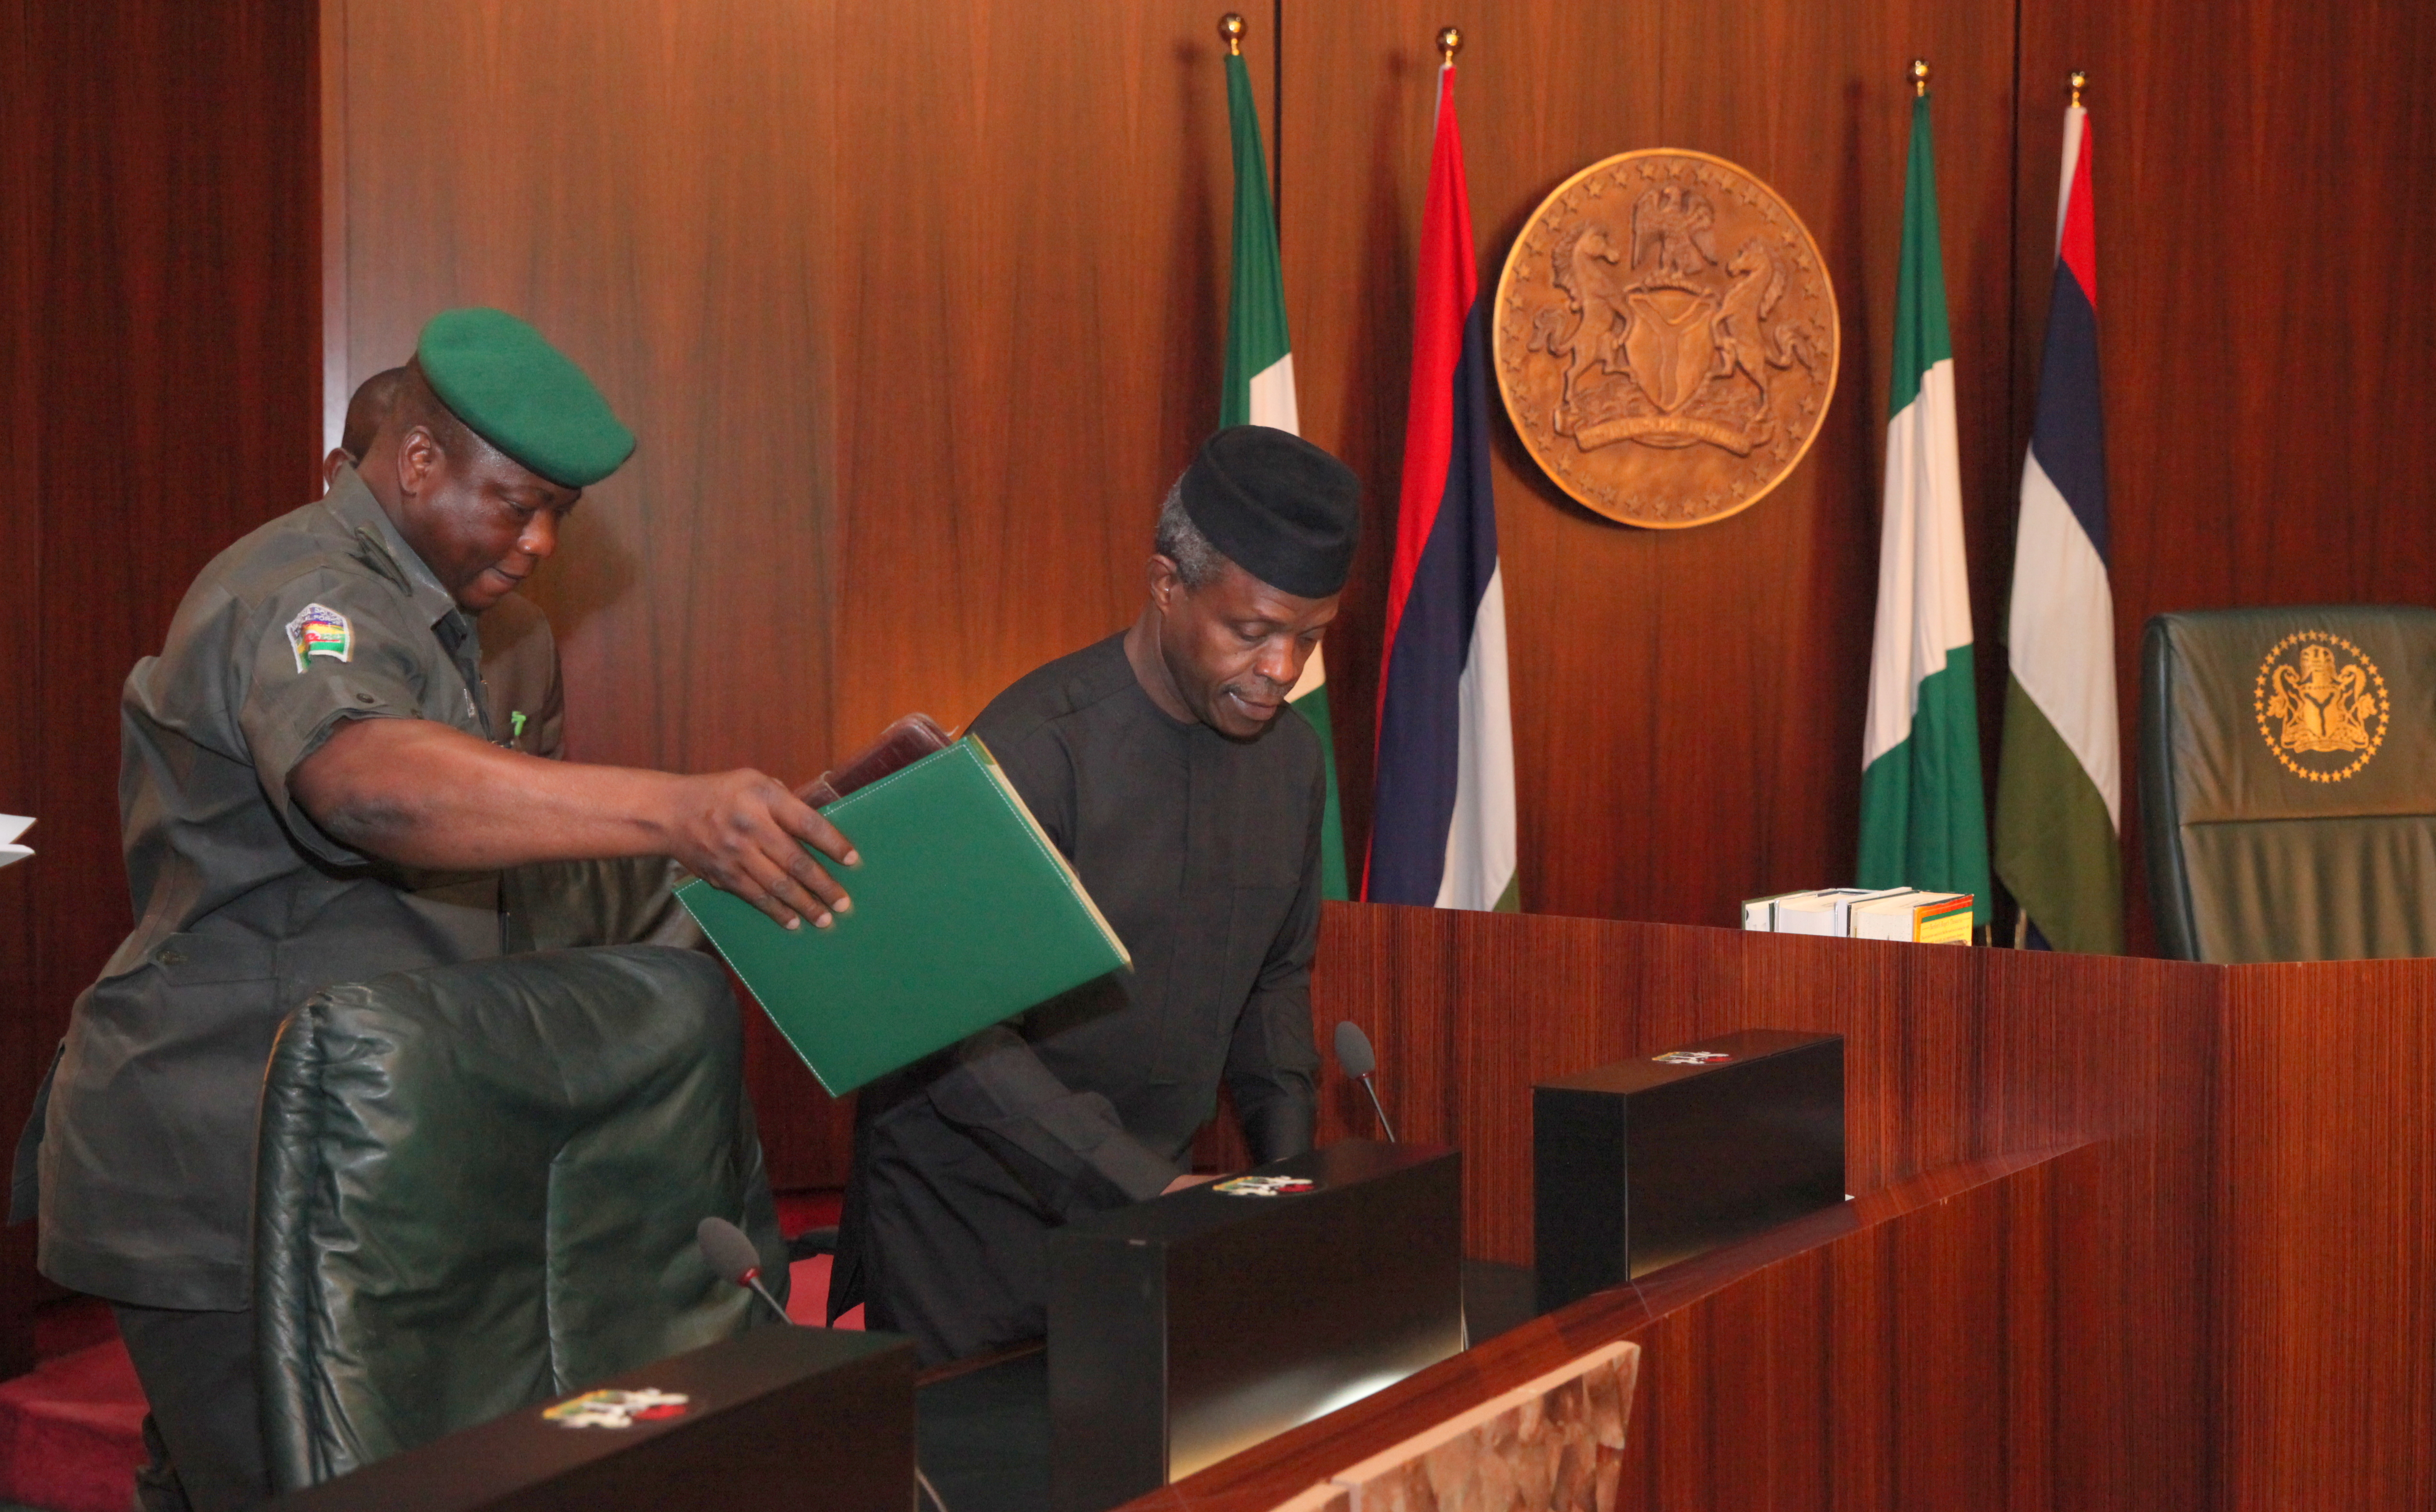 VP Osinbajo At The Budget Meeting With Permanent Secretary On 06/10/2015